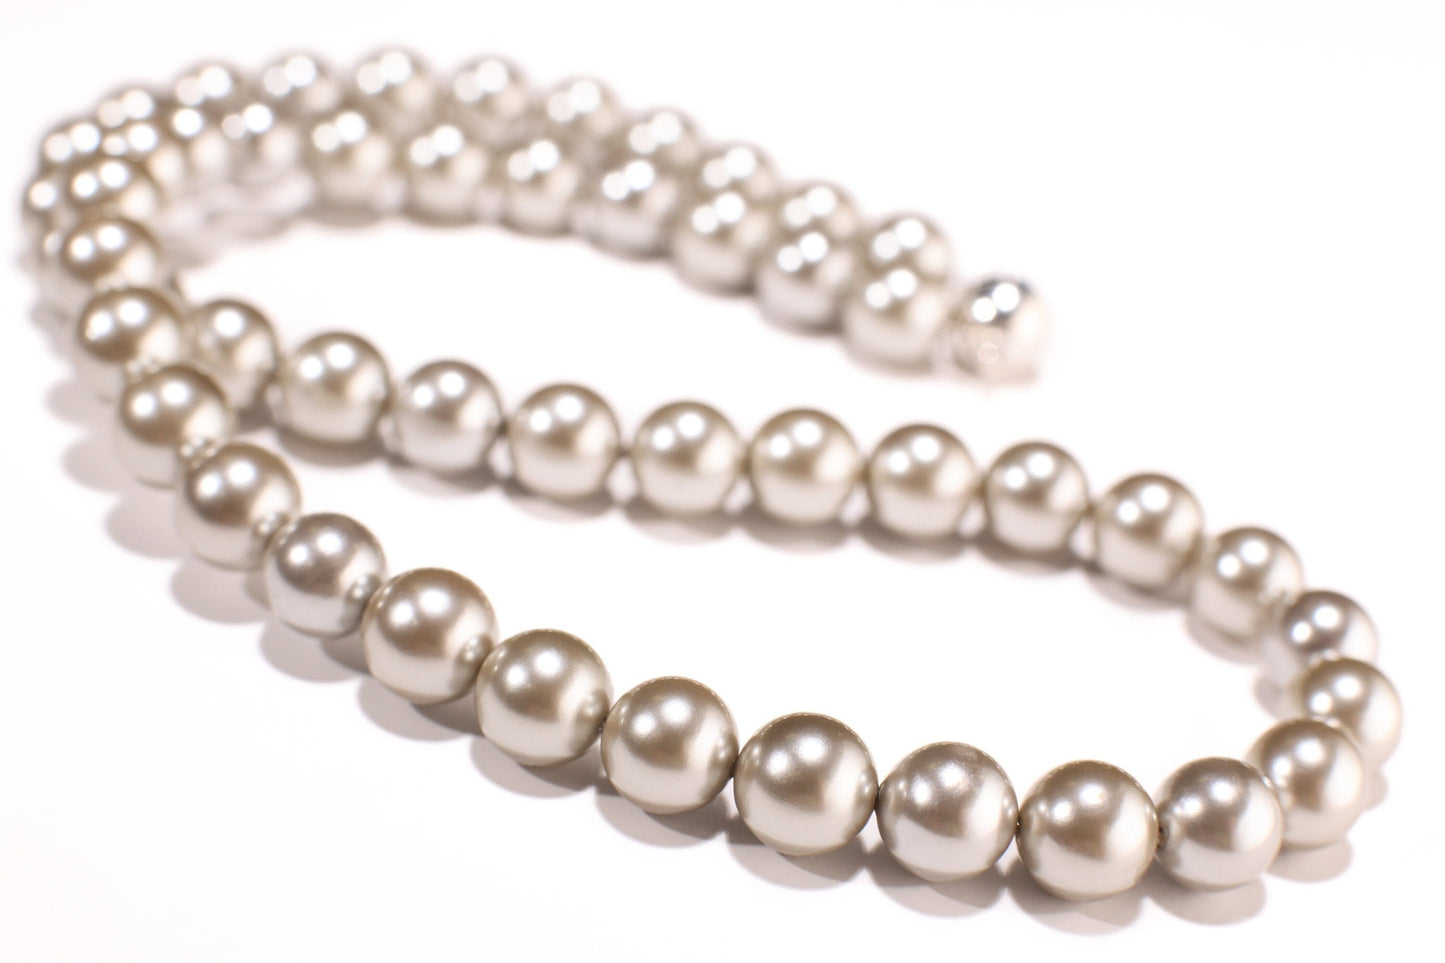 Silver Gray South Sea Shell Pearl 10mm High Luster Statement Necklace with Strong Magnetic Ball Clasp 20&quot; Necklace, Bridal,elegant Gift